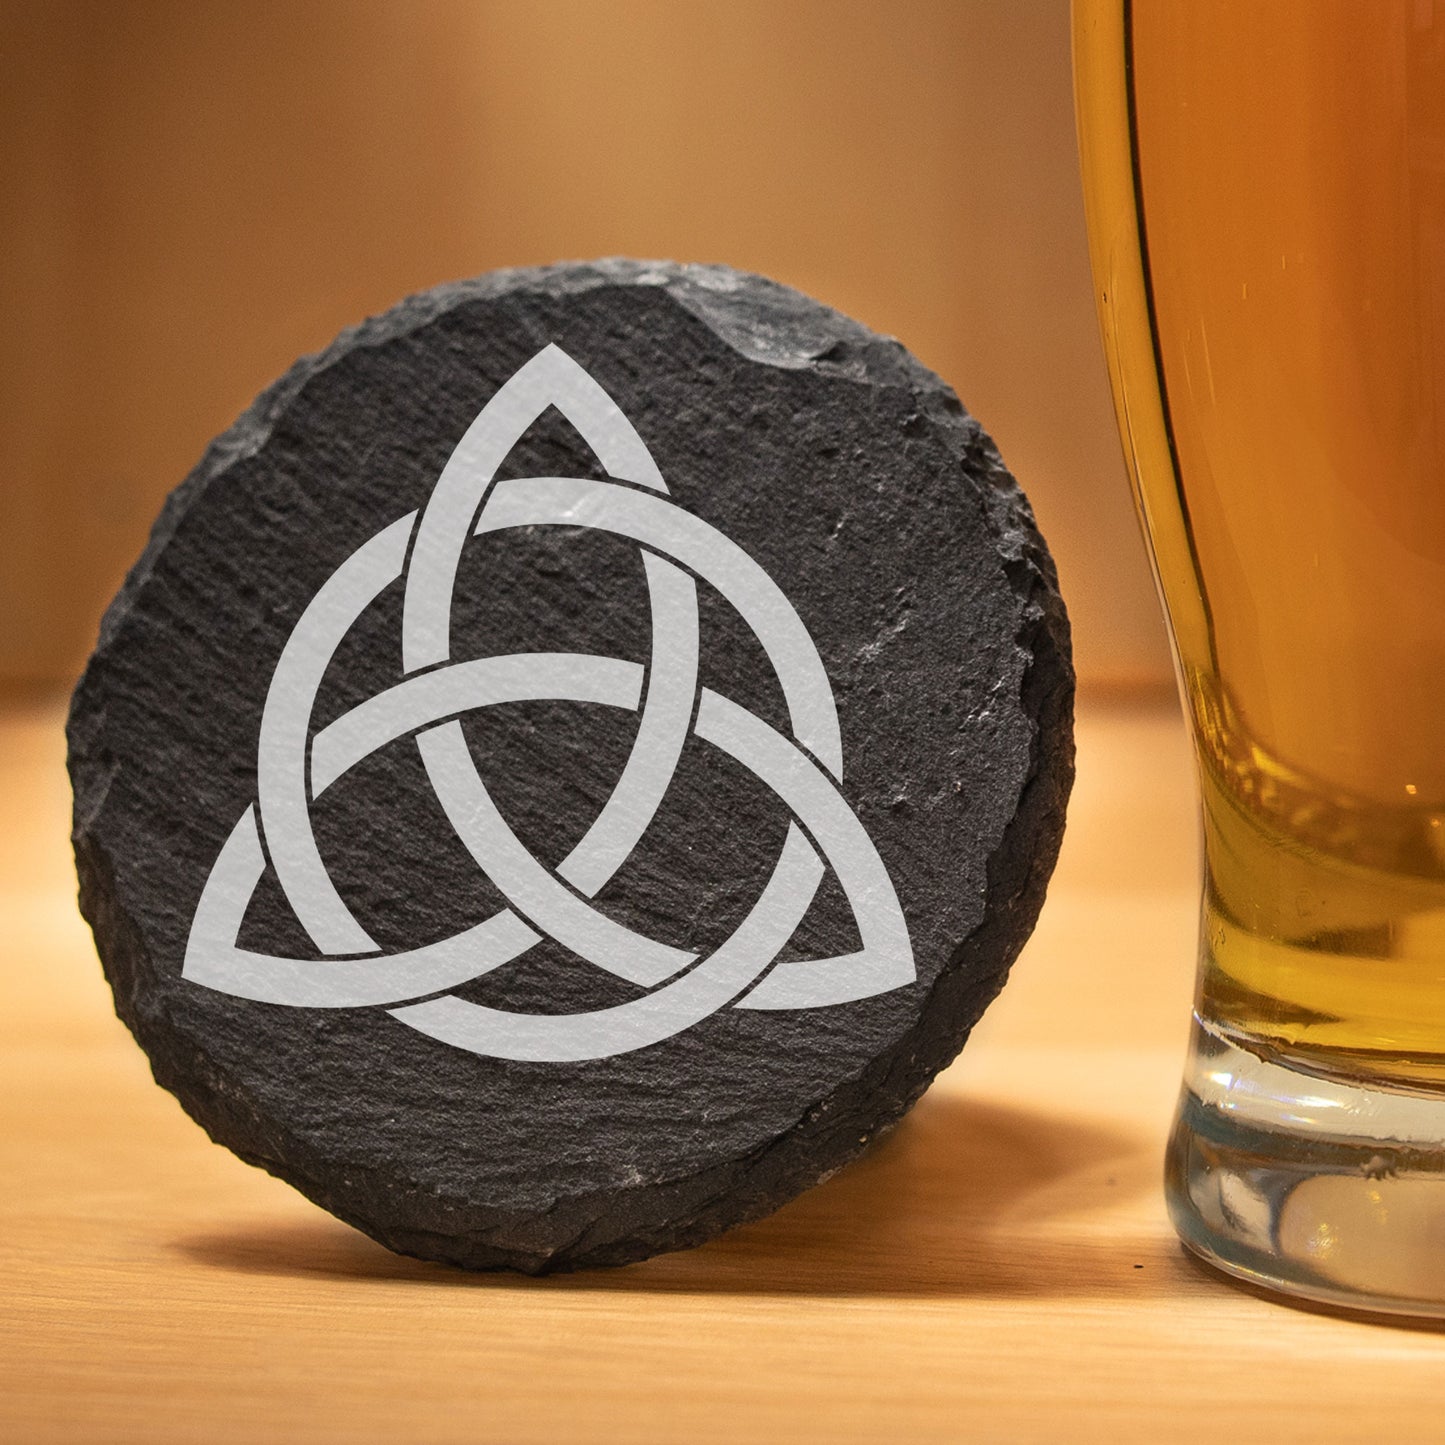 Celtic Knot Engraved Beer Pint Glass and/or Coaster Set  - Always Looking Good - Round Coaster Only  